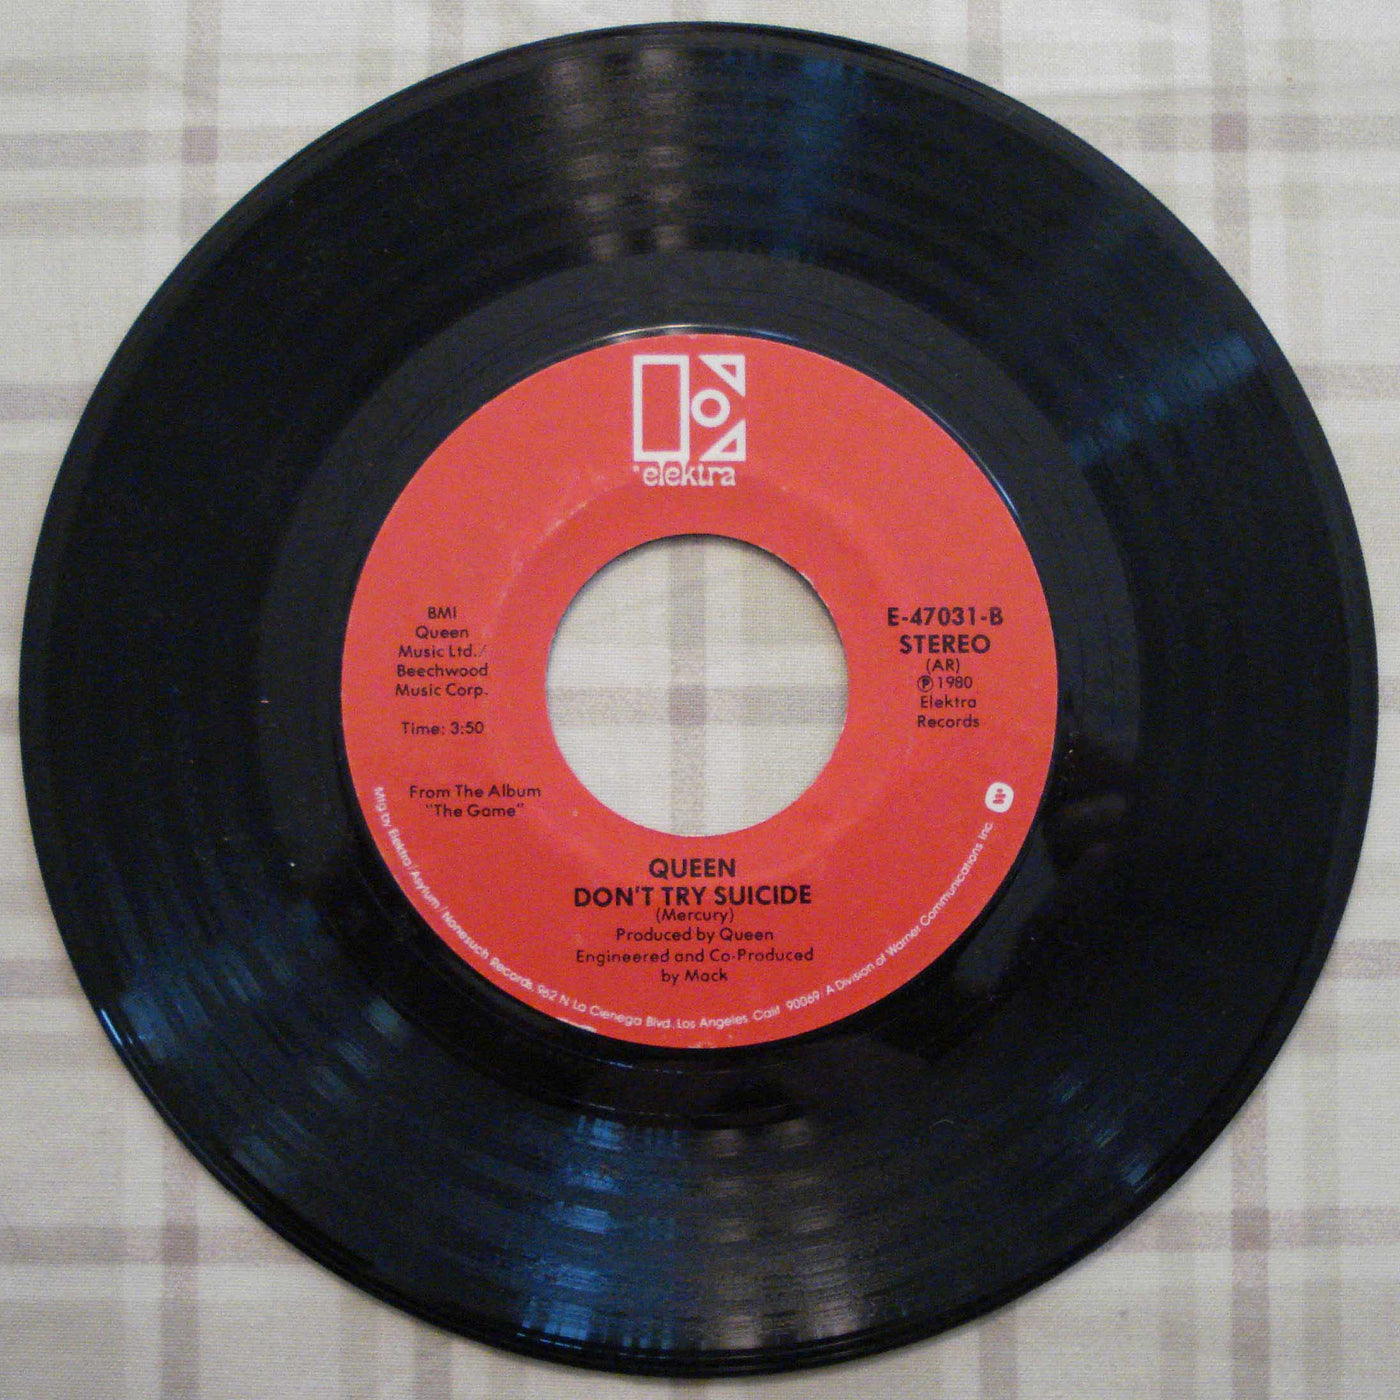 Queen - Another One Bites The Dust-Don't Try Suicide (1980) Vinyl Single 45rpm E-47031